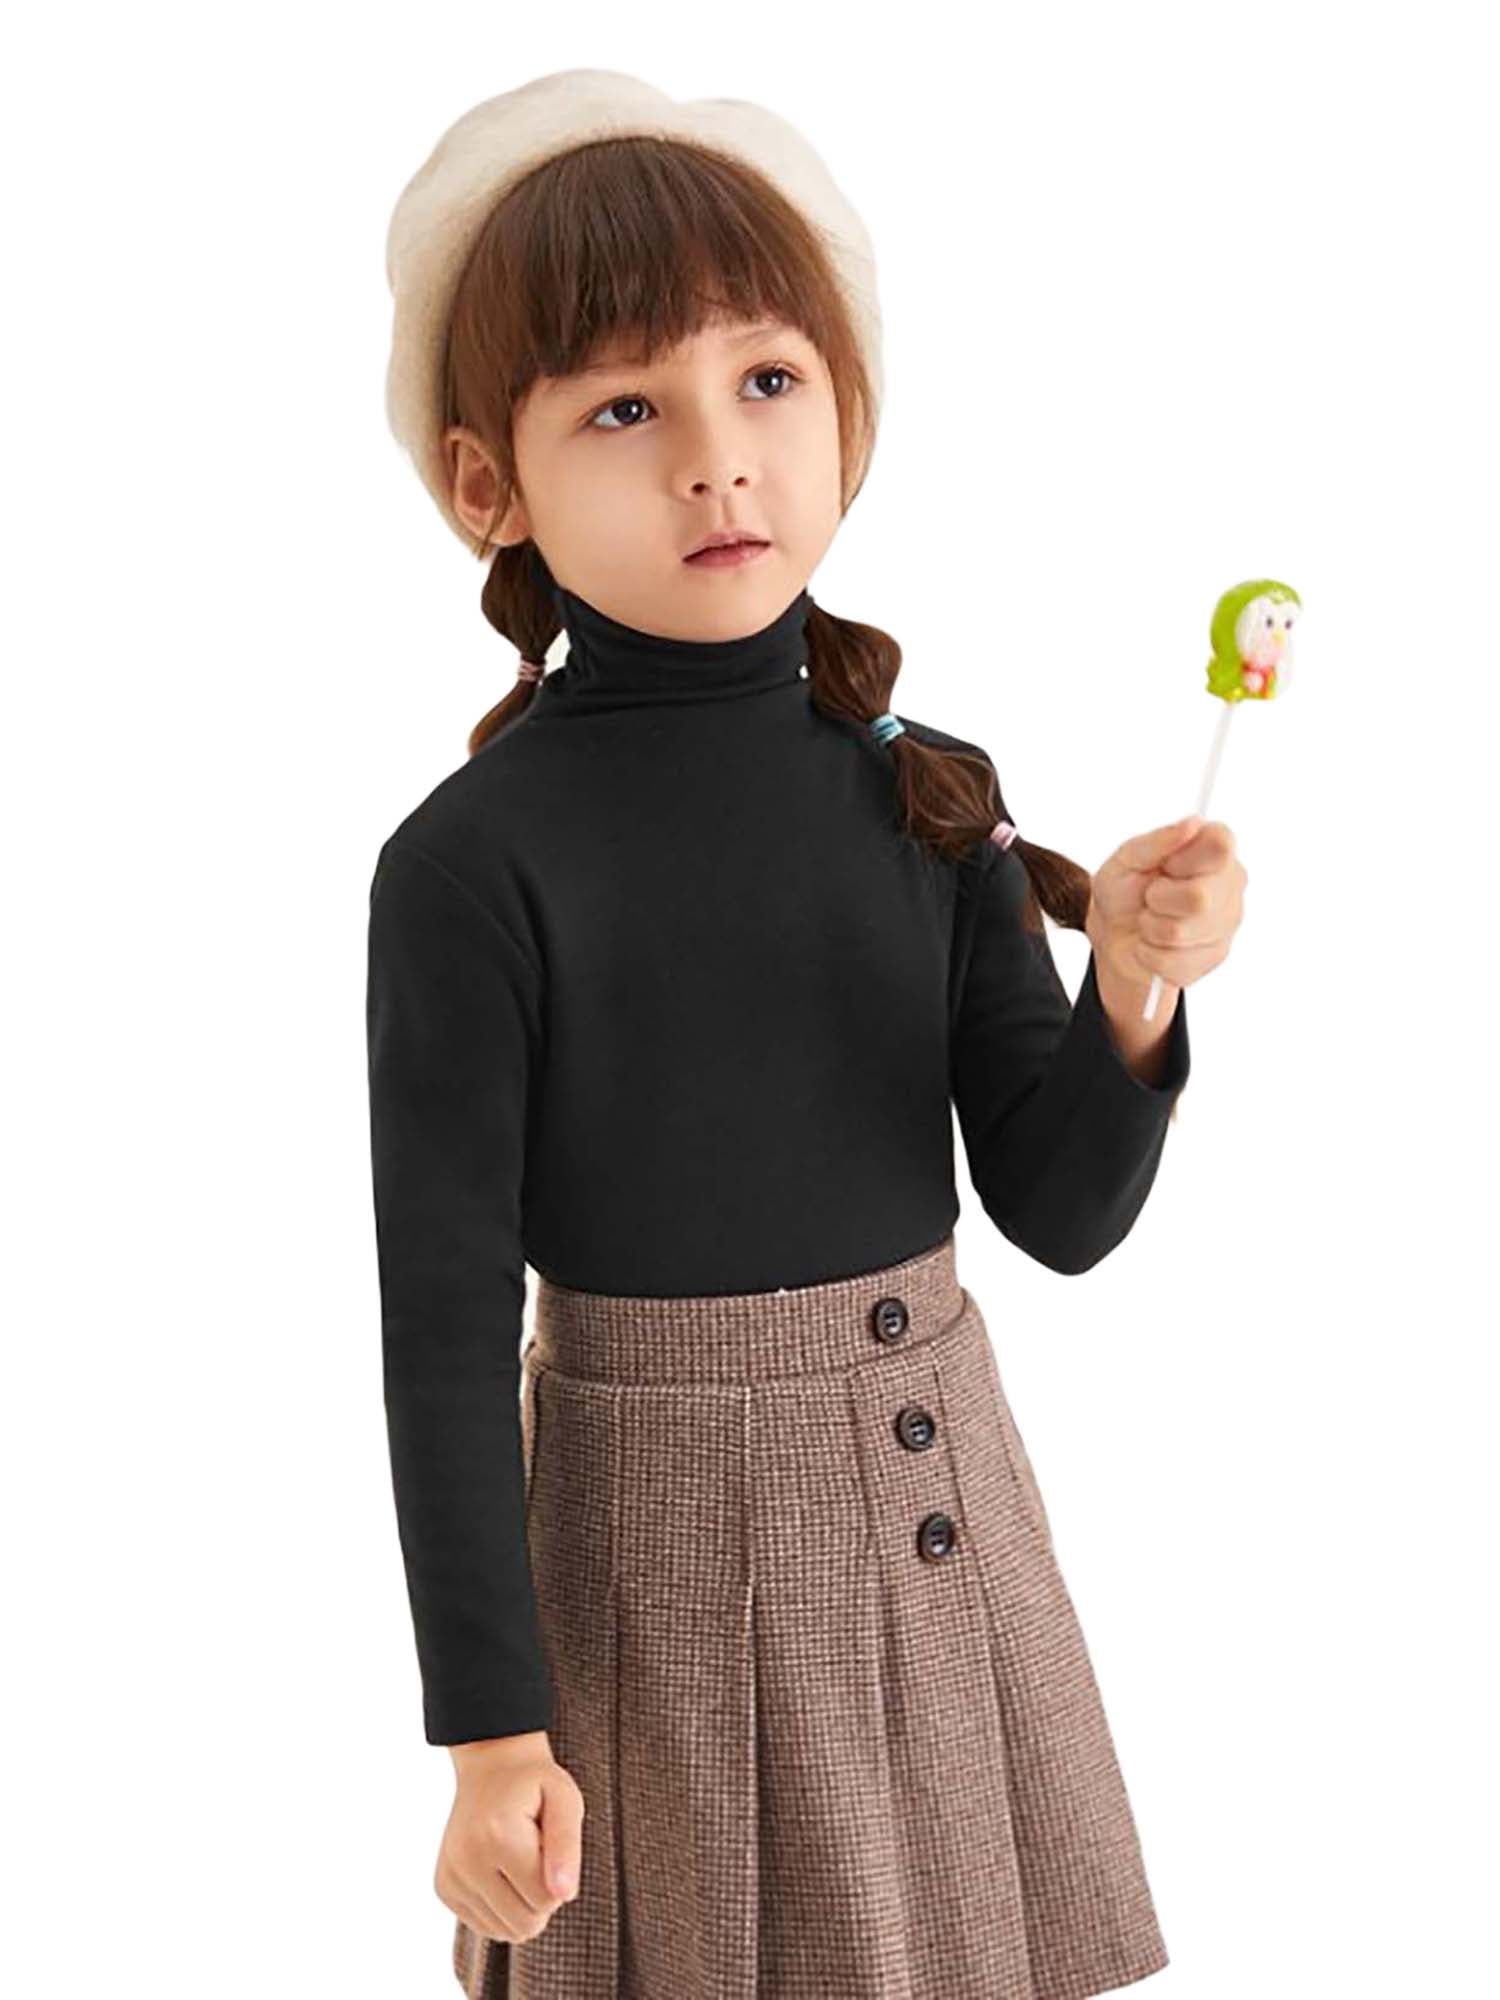 Baby Little Girls Long Sleeve Shirts Turtleneck T-Shirt Tops Basic Solid Color Blouse Outfit for Toddler Kids Girl 